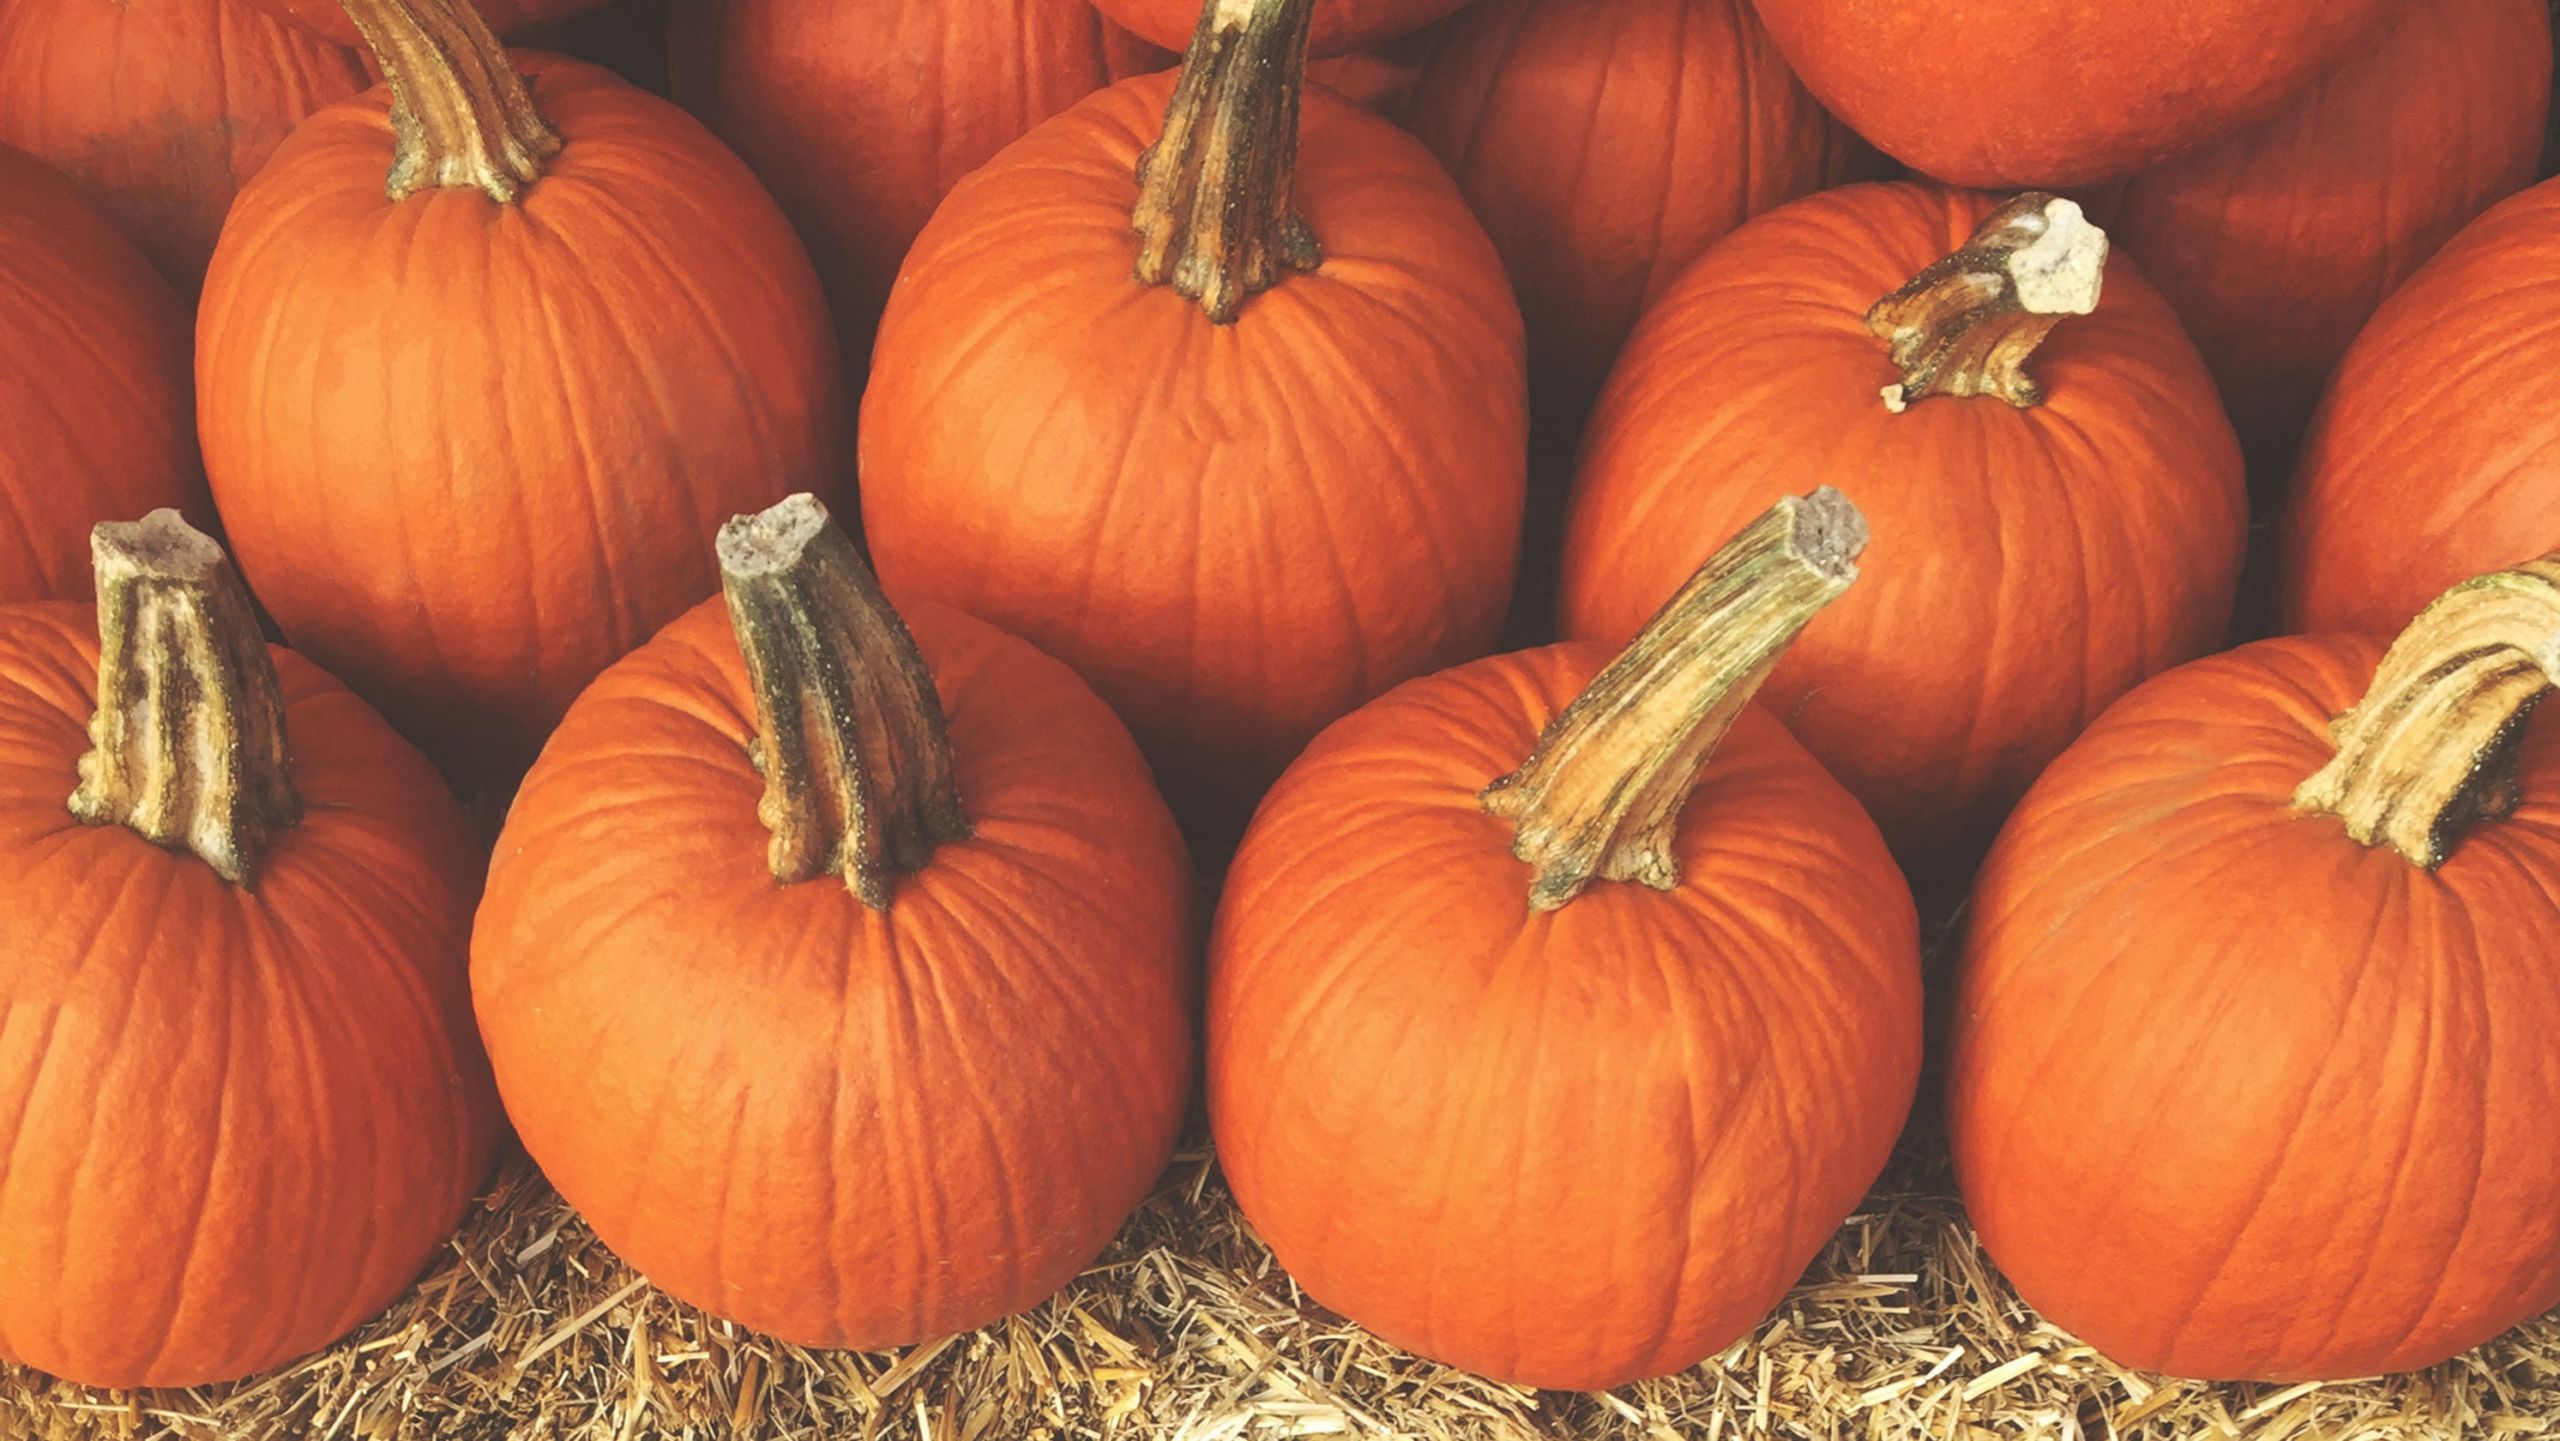 Fall Activities Nj
 Fall festivals in NJ South Jersey events include pumpkins